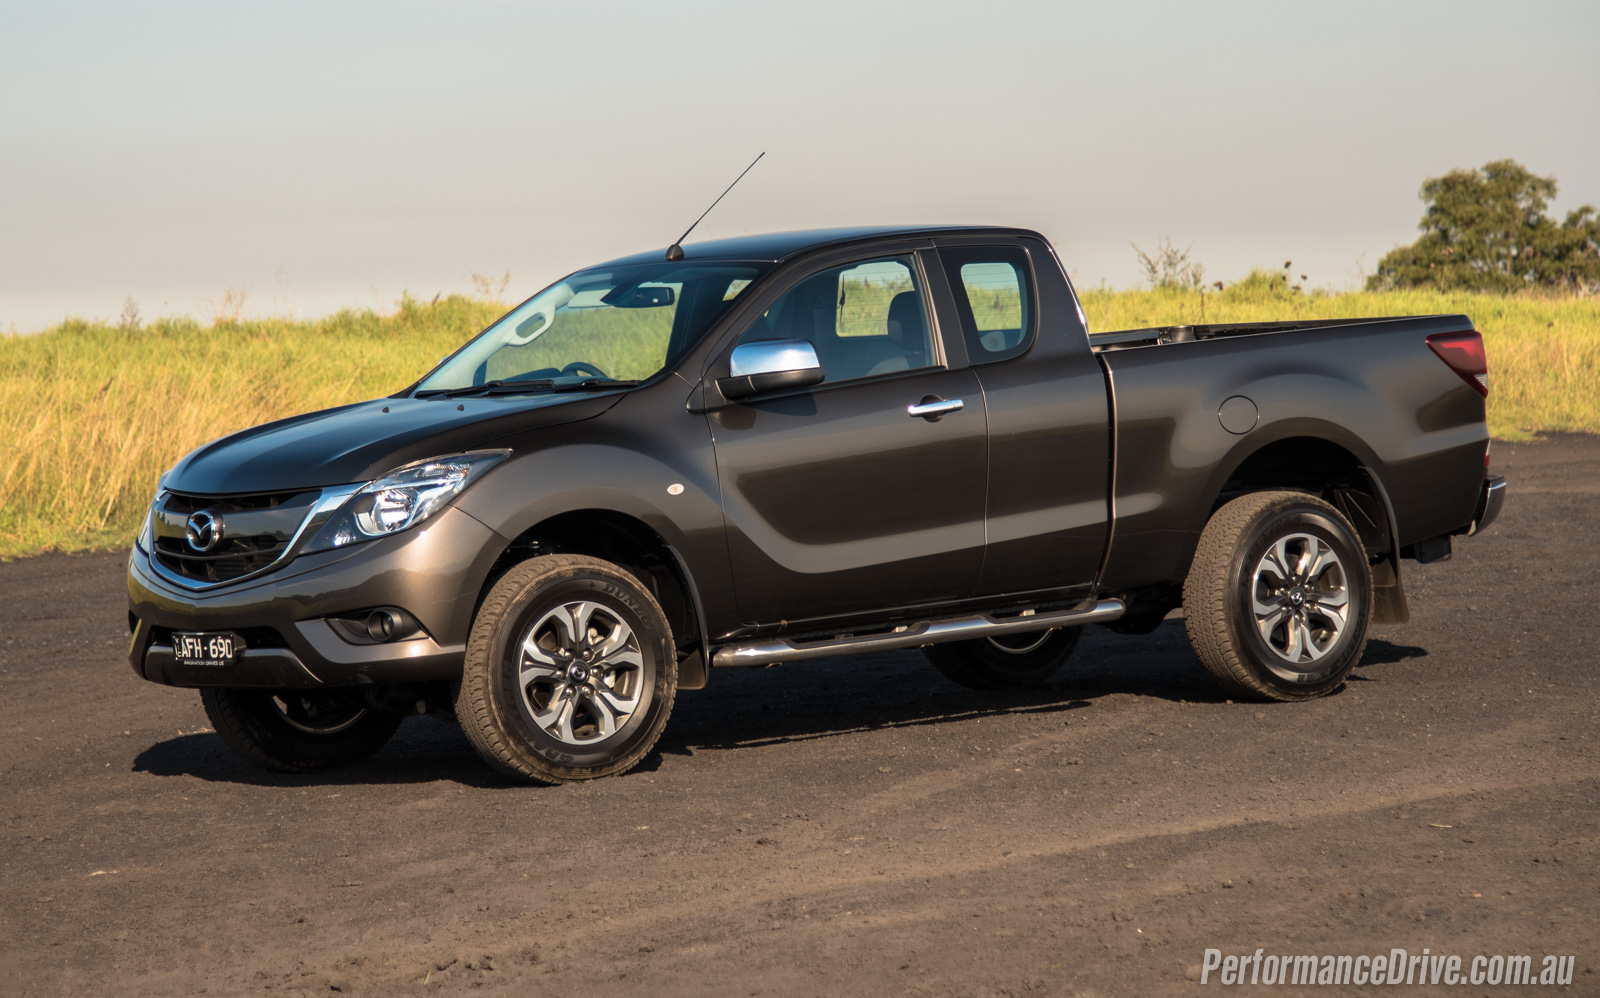 2016 Mazda BT-50 XTR Freestyle review (video)